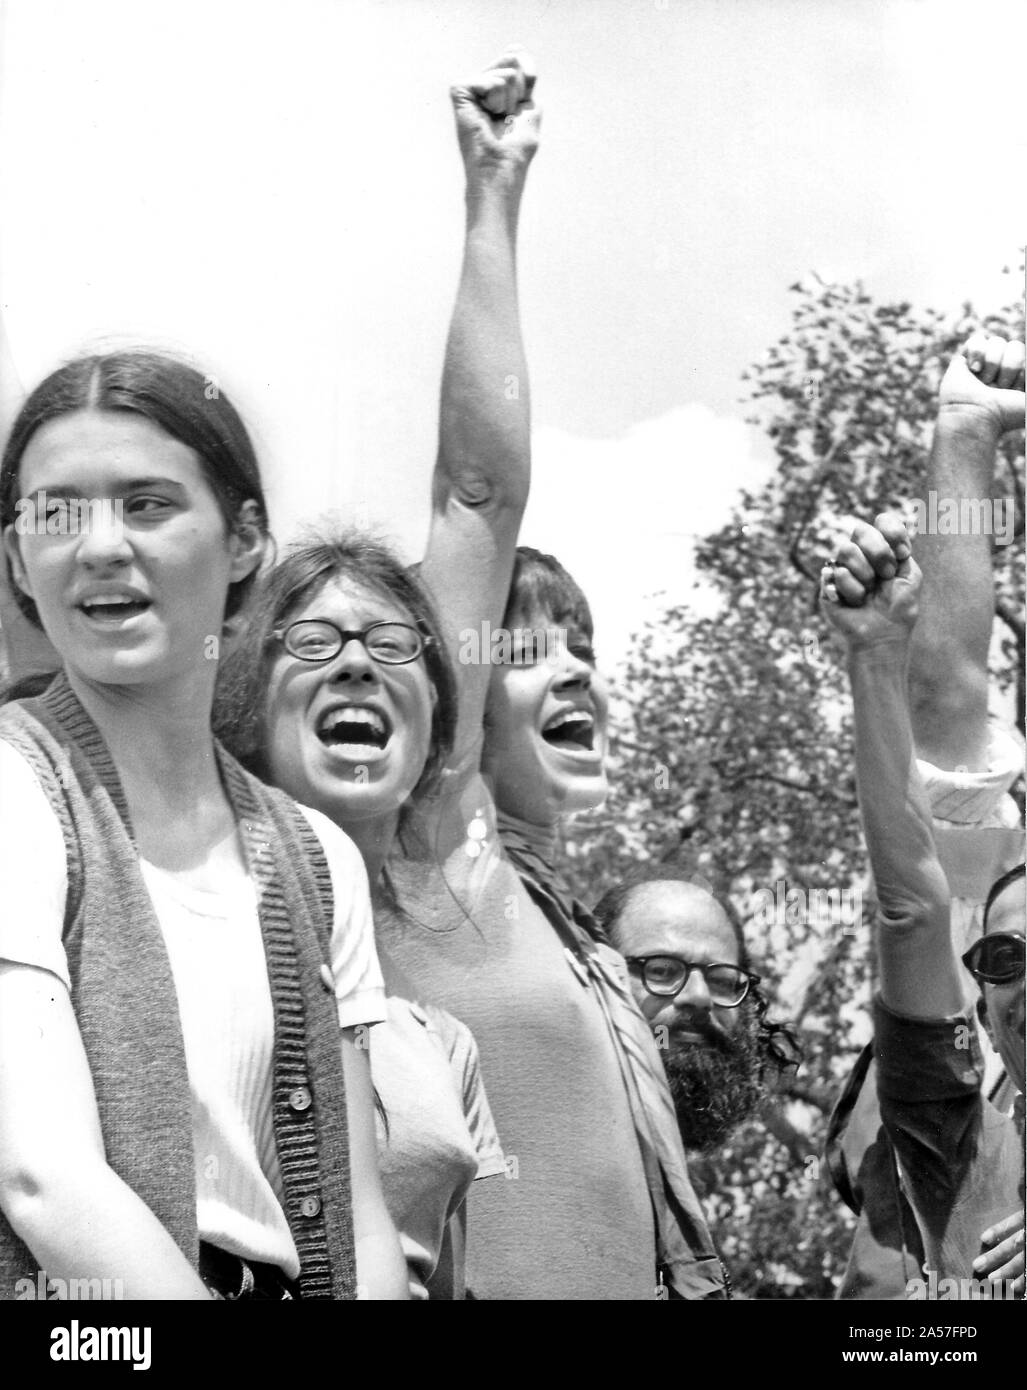 Washington, District of Columbia, USA. 9th May, 1970. Actress Jane Fonda raises her clenched fist towards the demonstrators as they shout ''power to the people'' after she addressed the estimated 100,000 people who attended the anti-war rally by the White House. The Demonstration was generally non-violent save for scattered outbreaks along Pennsylvania Avenue near the Department of Justice Building in Washington, DC on May 9, 1970 Credit: Benjamin E. ''Gene'' Forte/CNP/ZUMA Wire/Alamy Live News Stock Photo